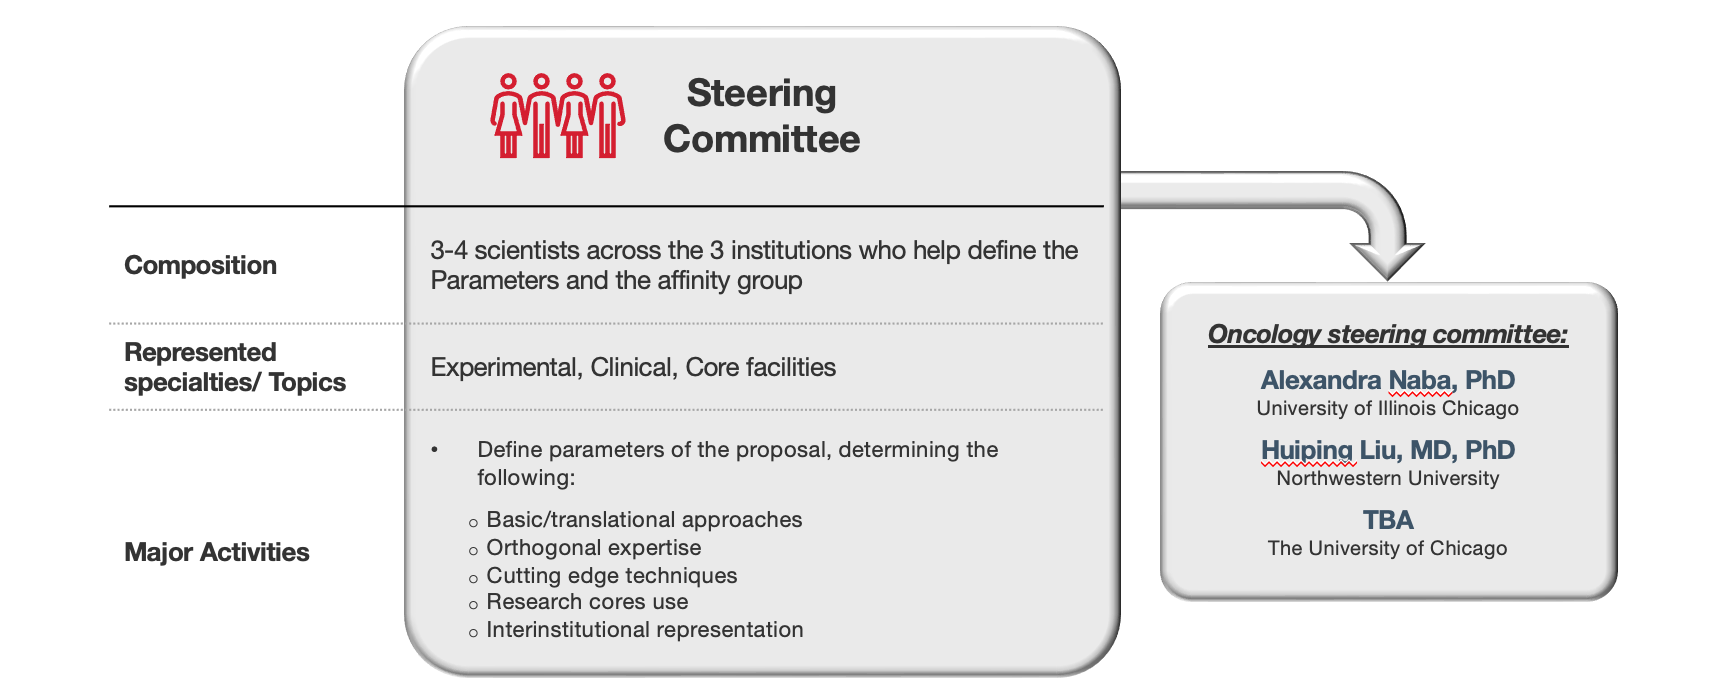 Affinity Group Components: Steering Committee